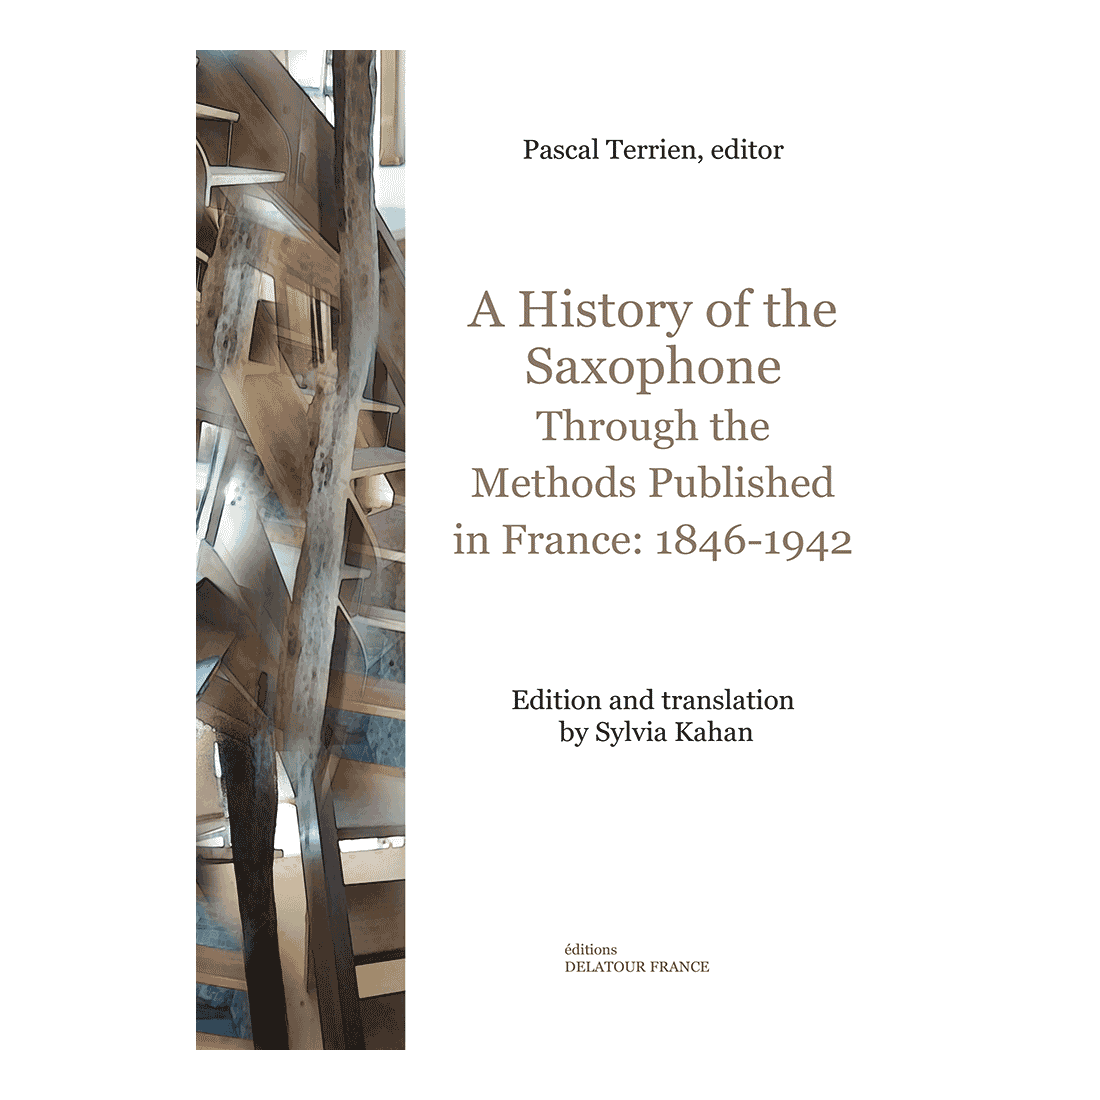 A History of the Saxophone Through the Methods Published in France: 1846-1942